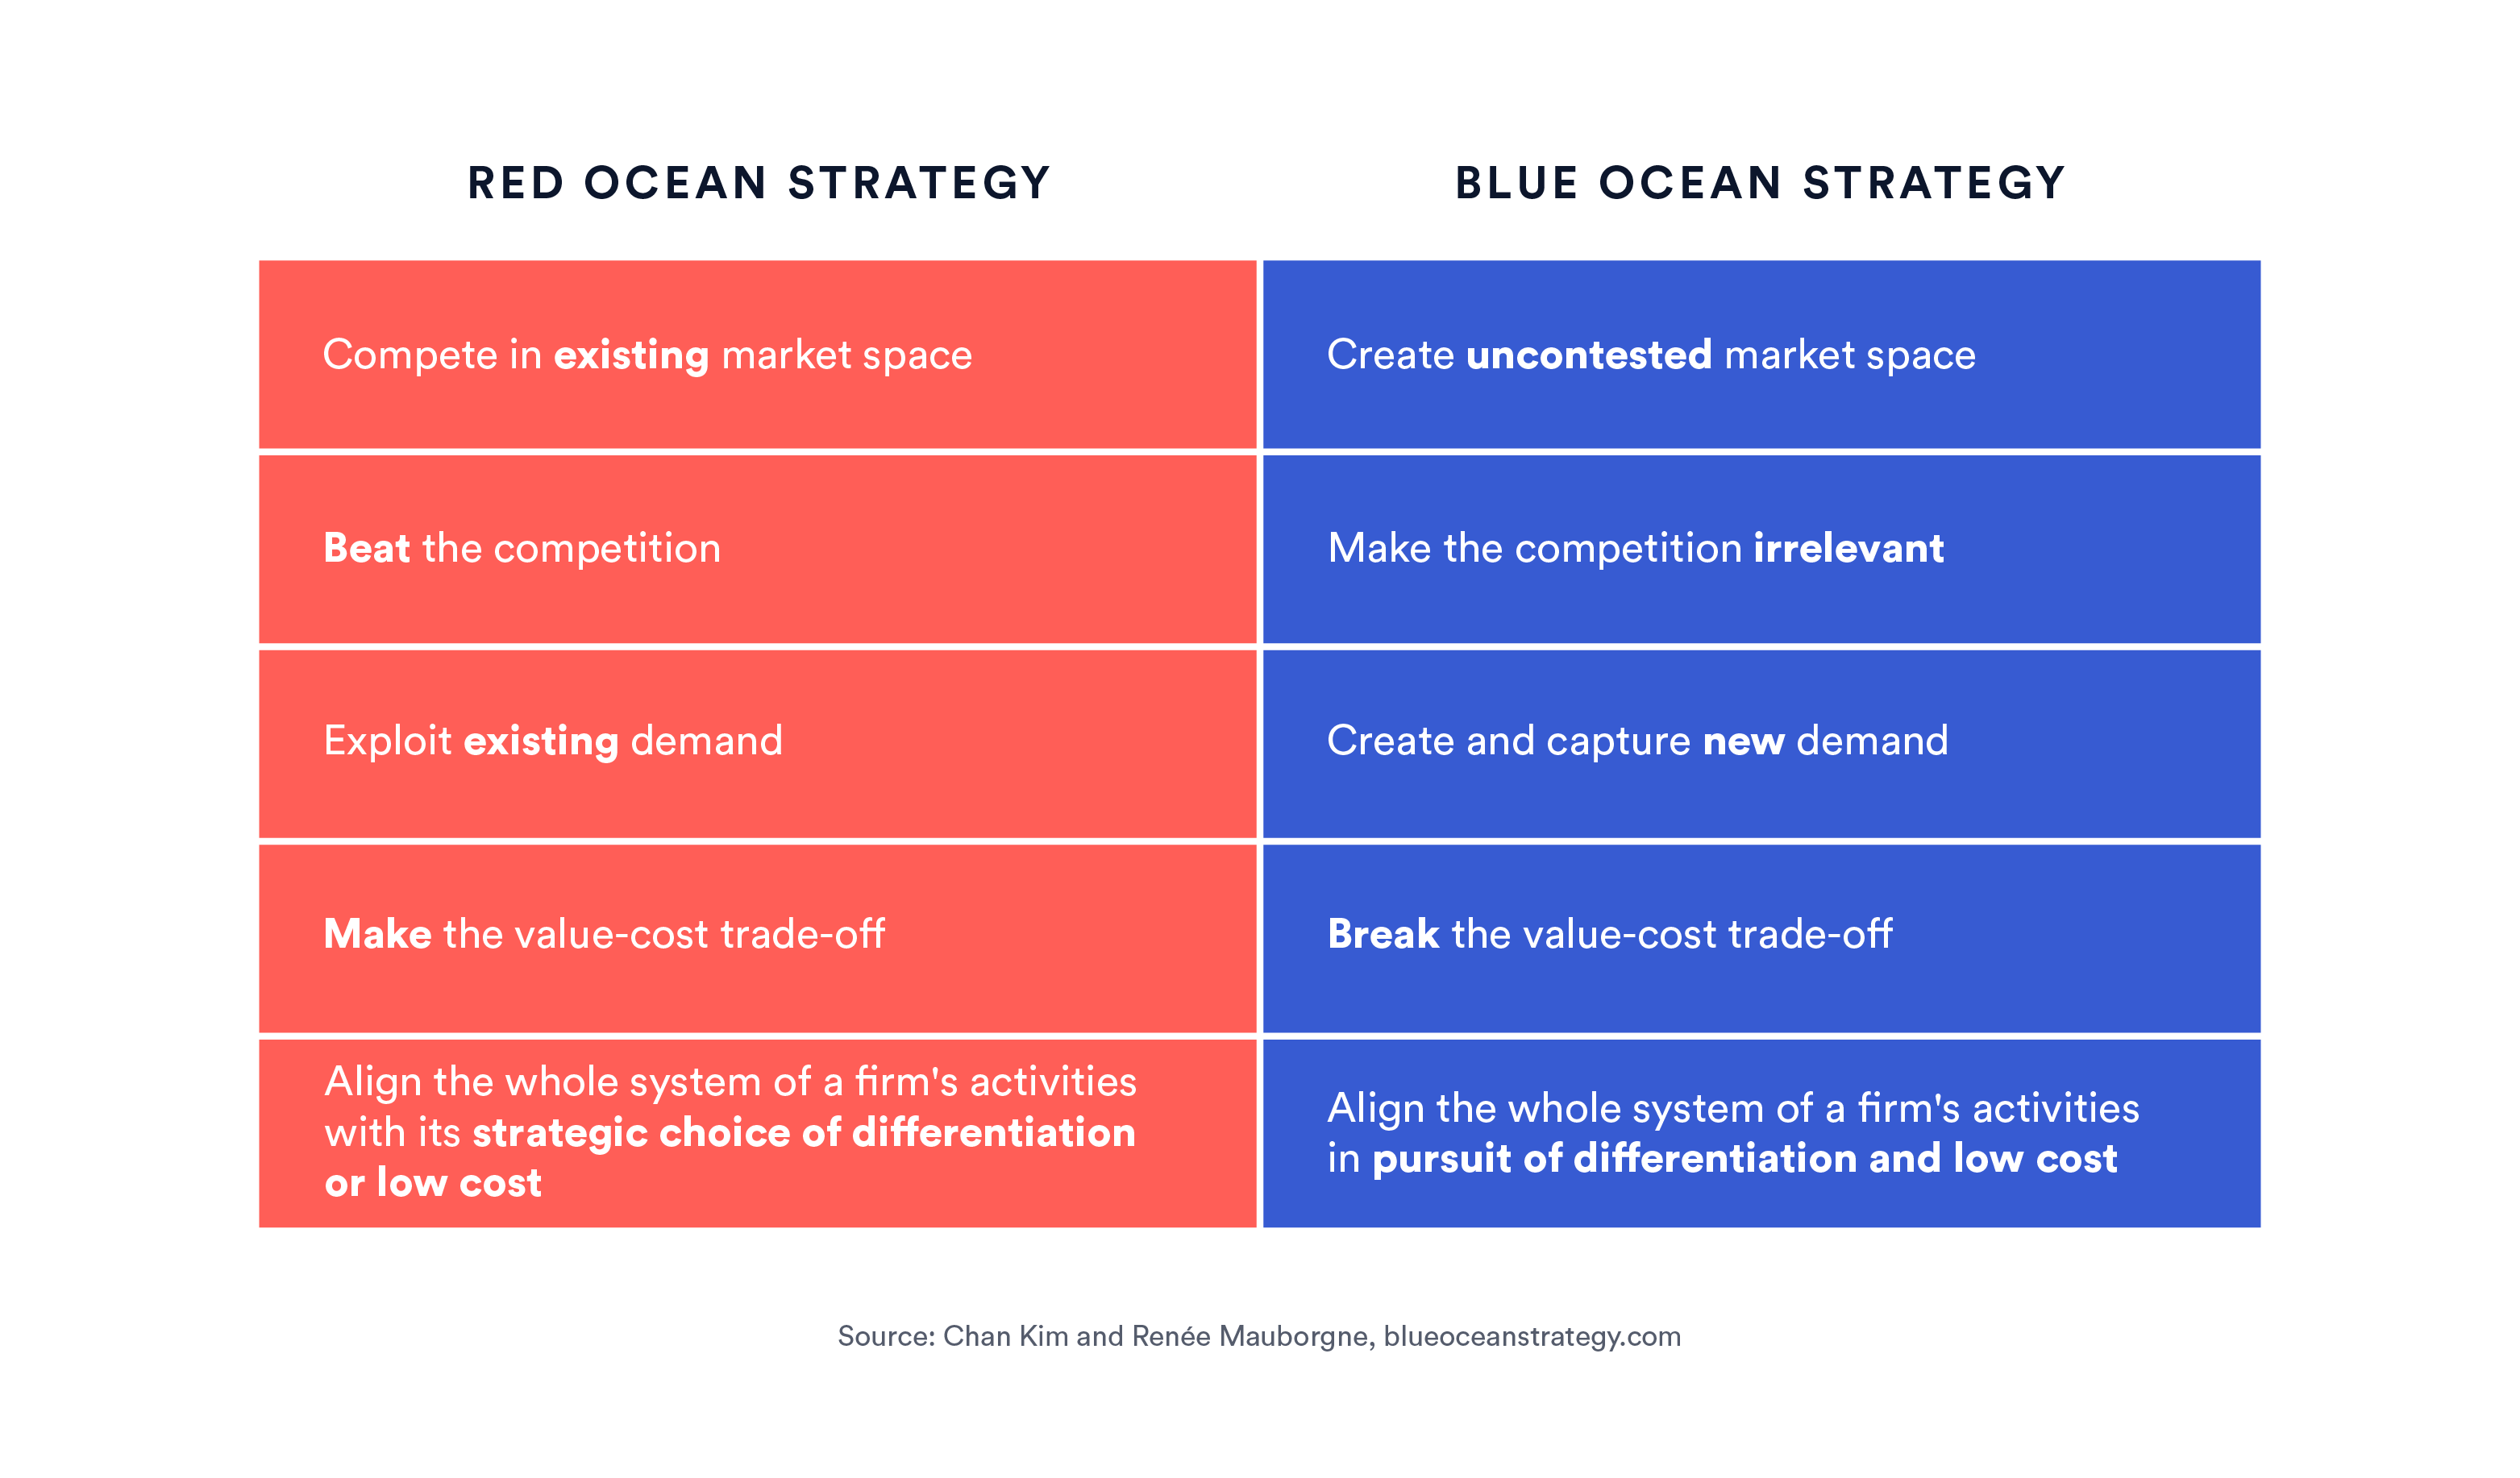 Table comparing blue ocean and red ocean strategies